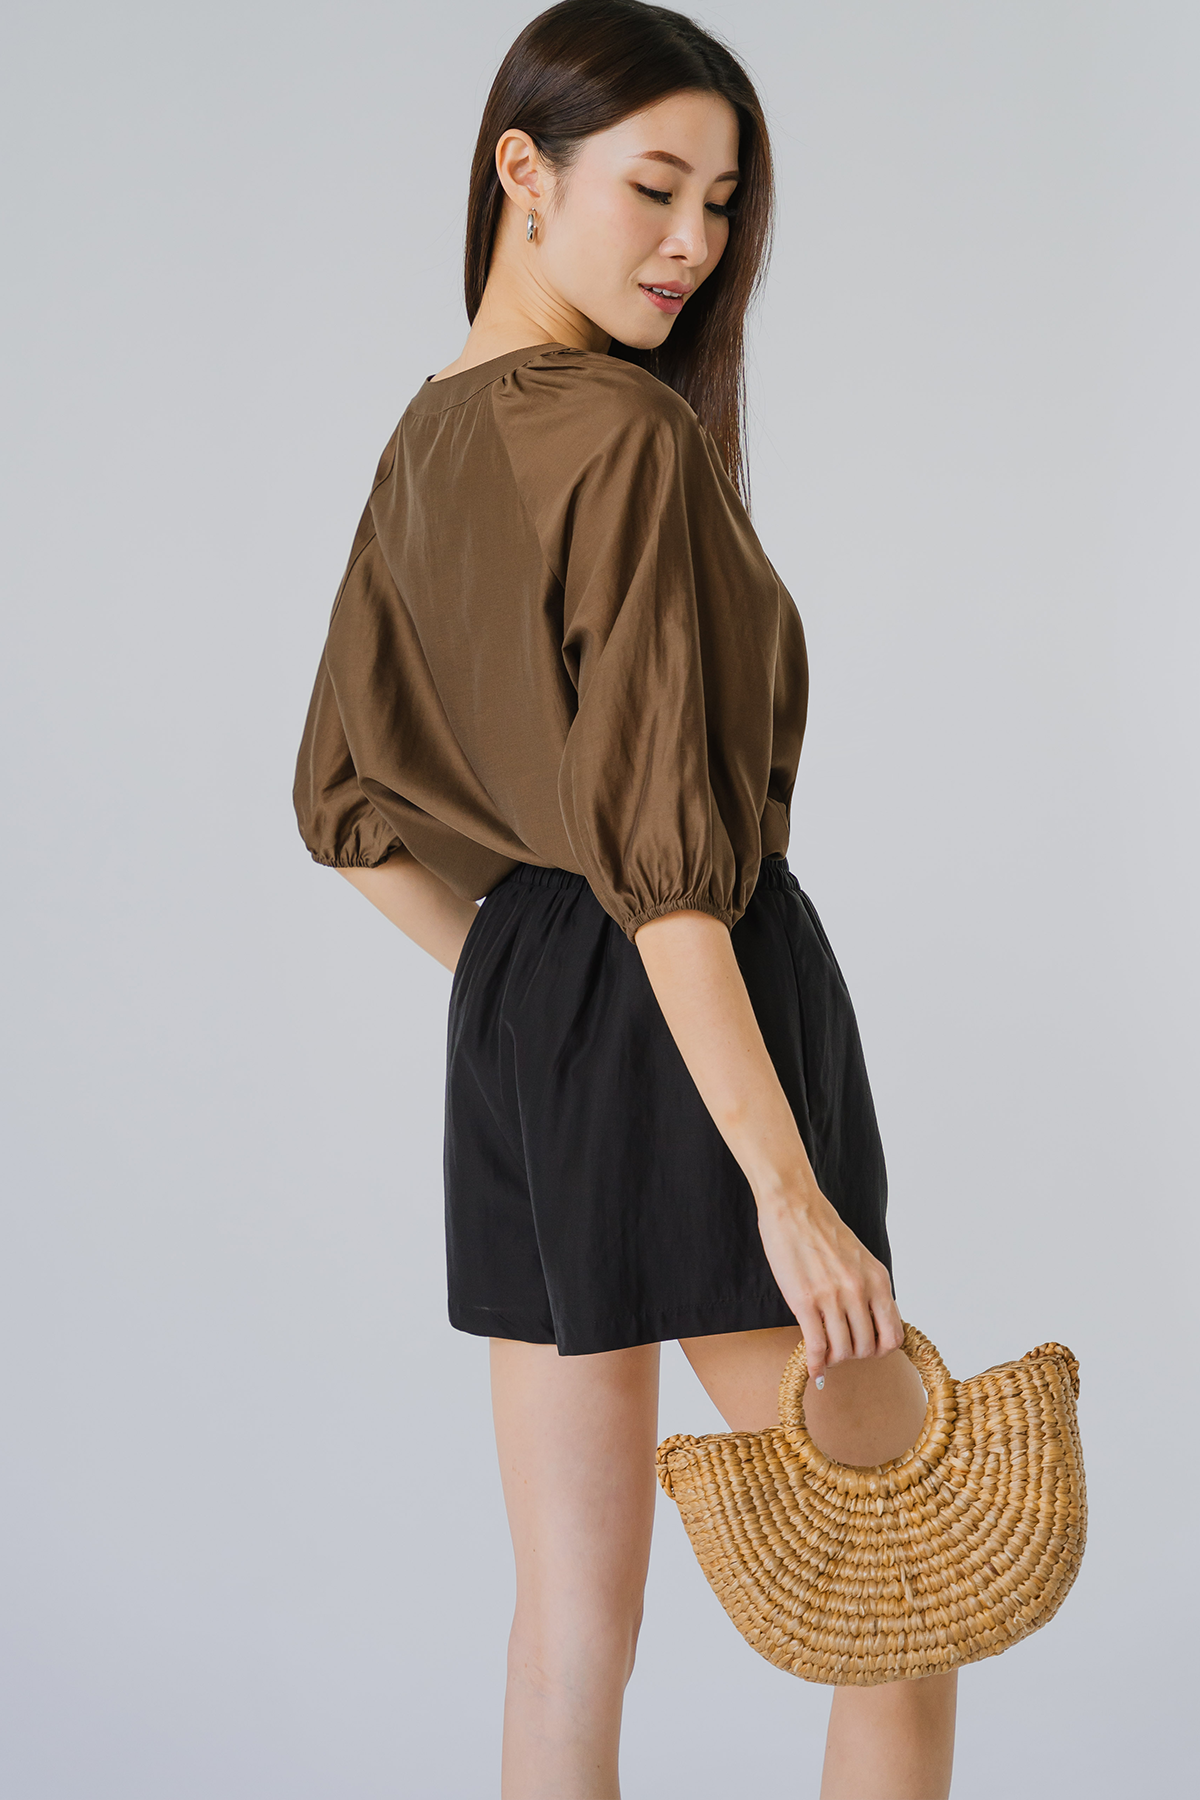 Have It All Tencel Top (Brown)